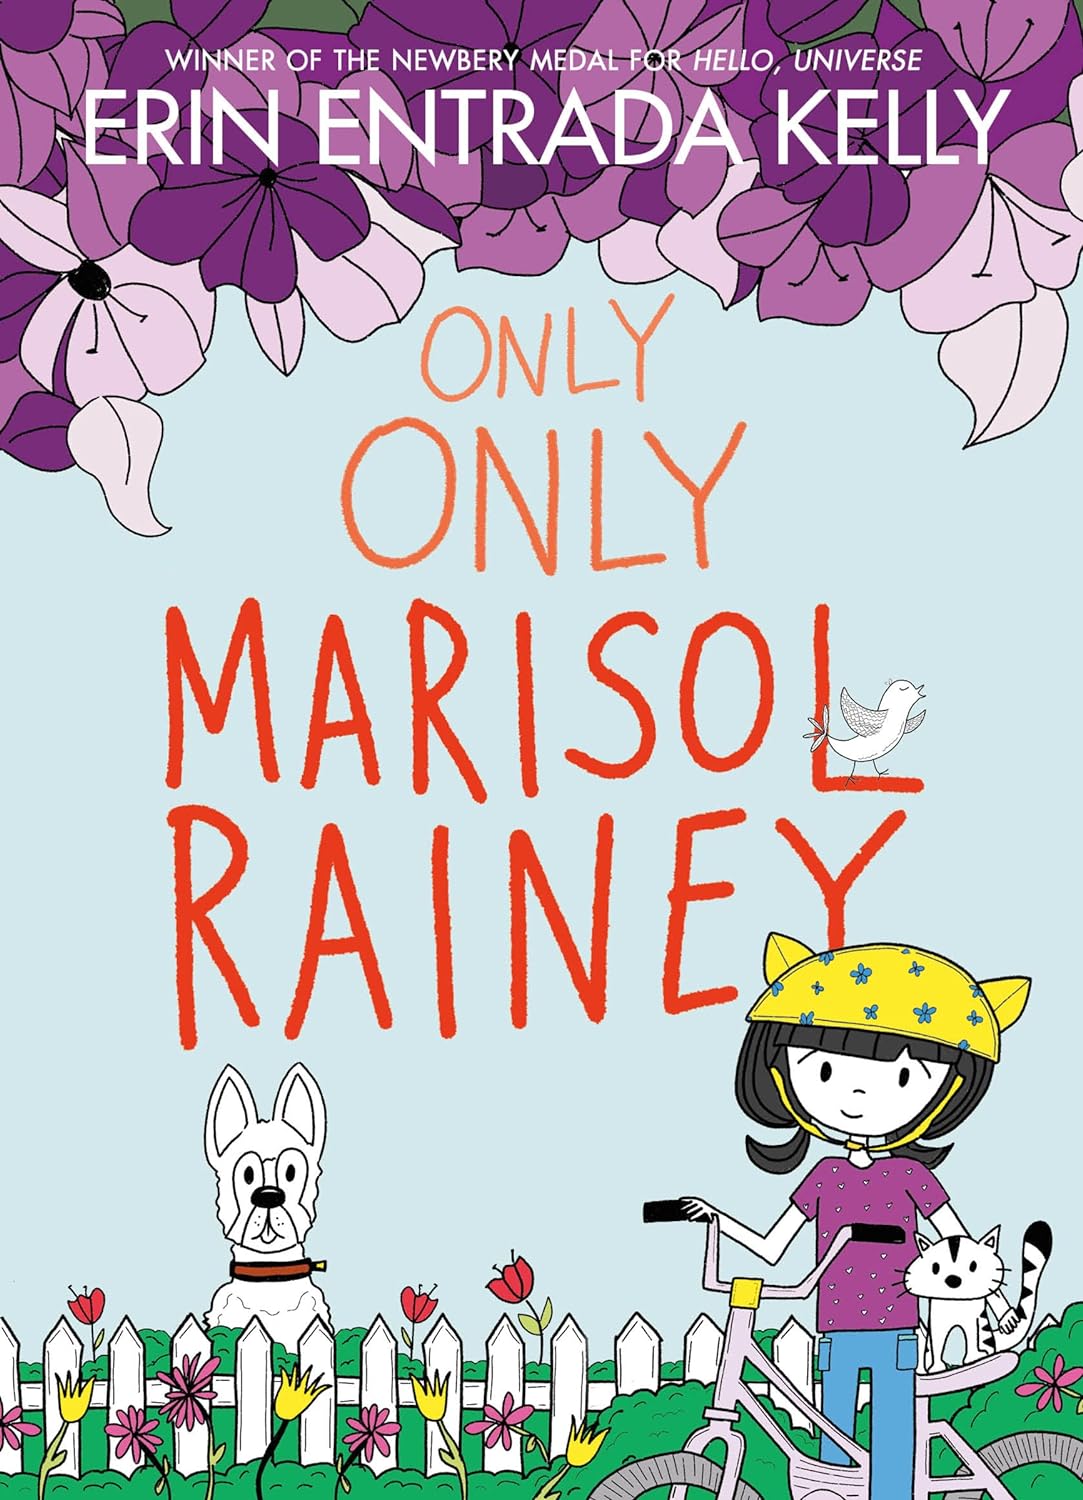 Only Only Marisol Rainey (Hardcover)